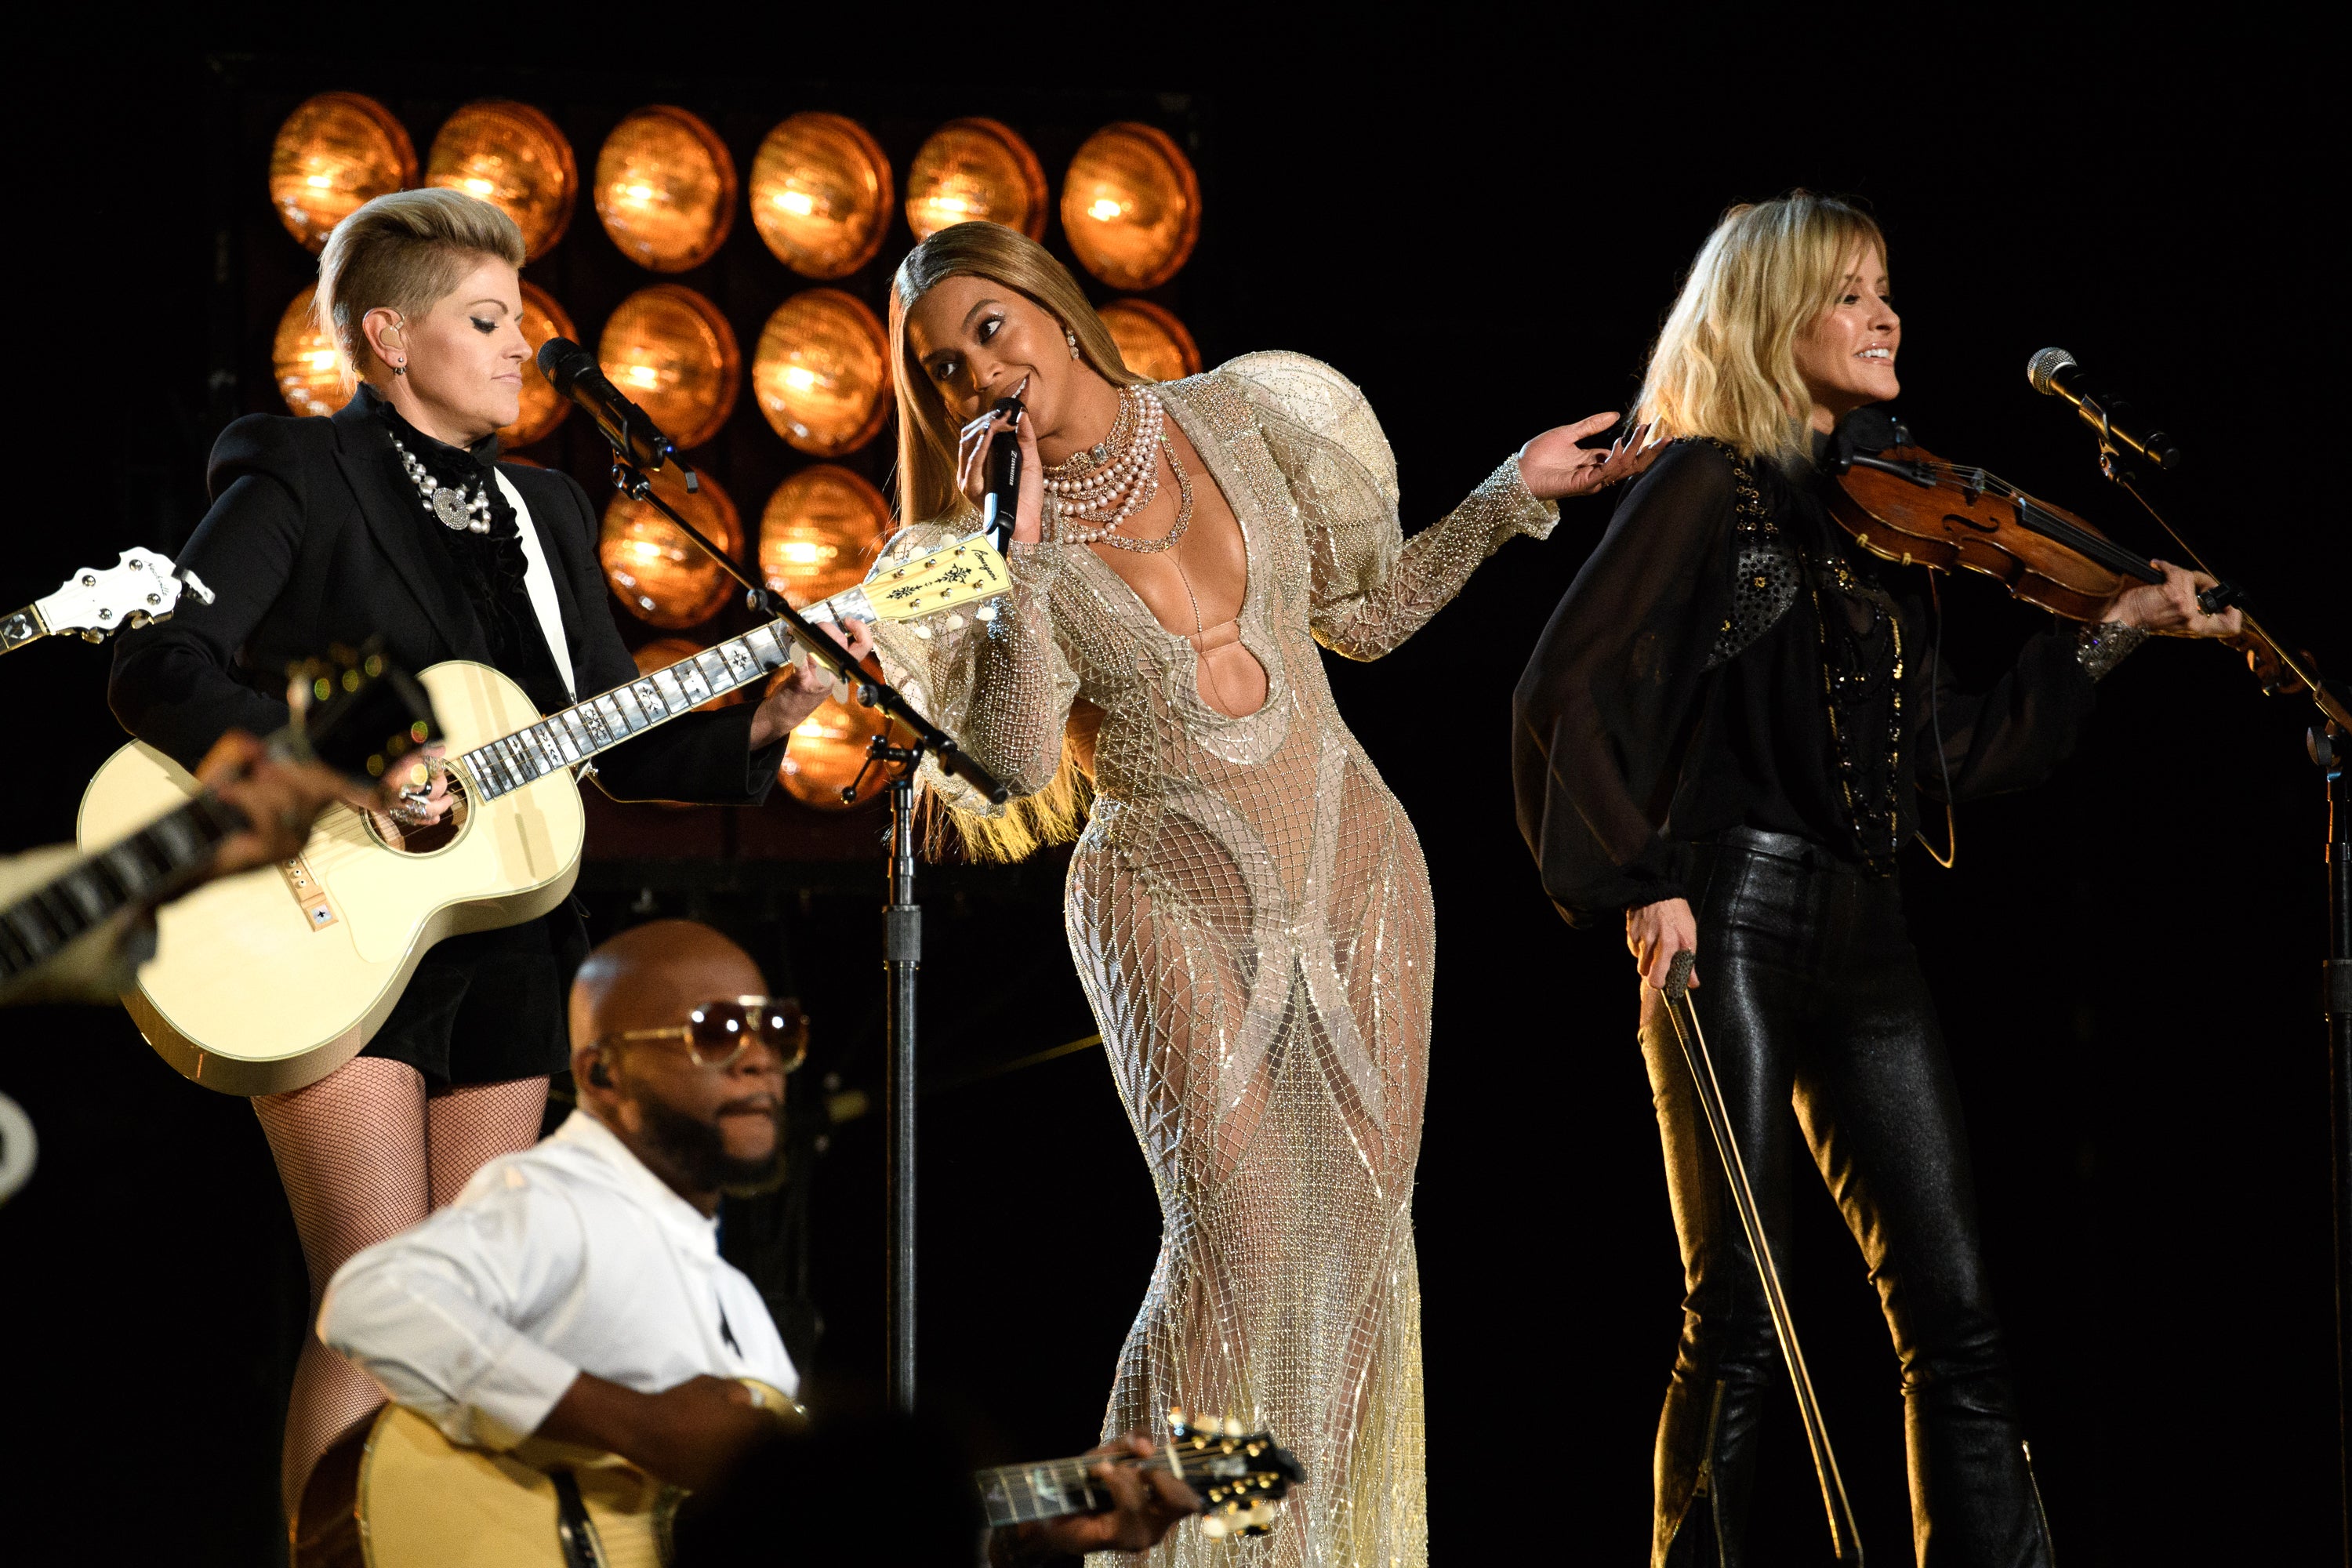 We've Been Here - The Problem With Erasing Black Women From Country And Rock Music
